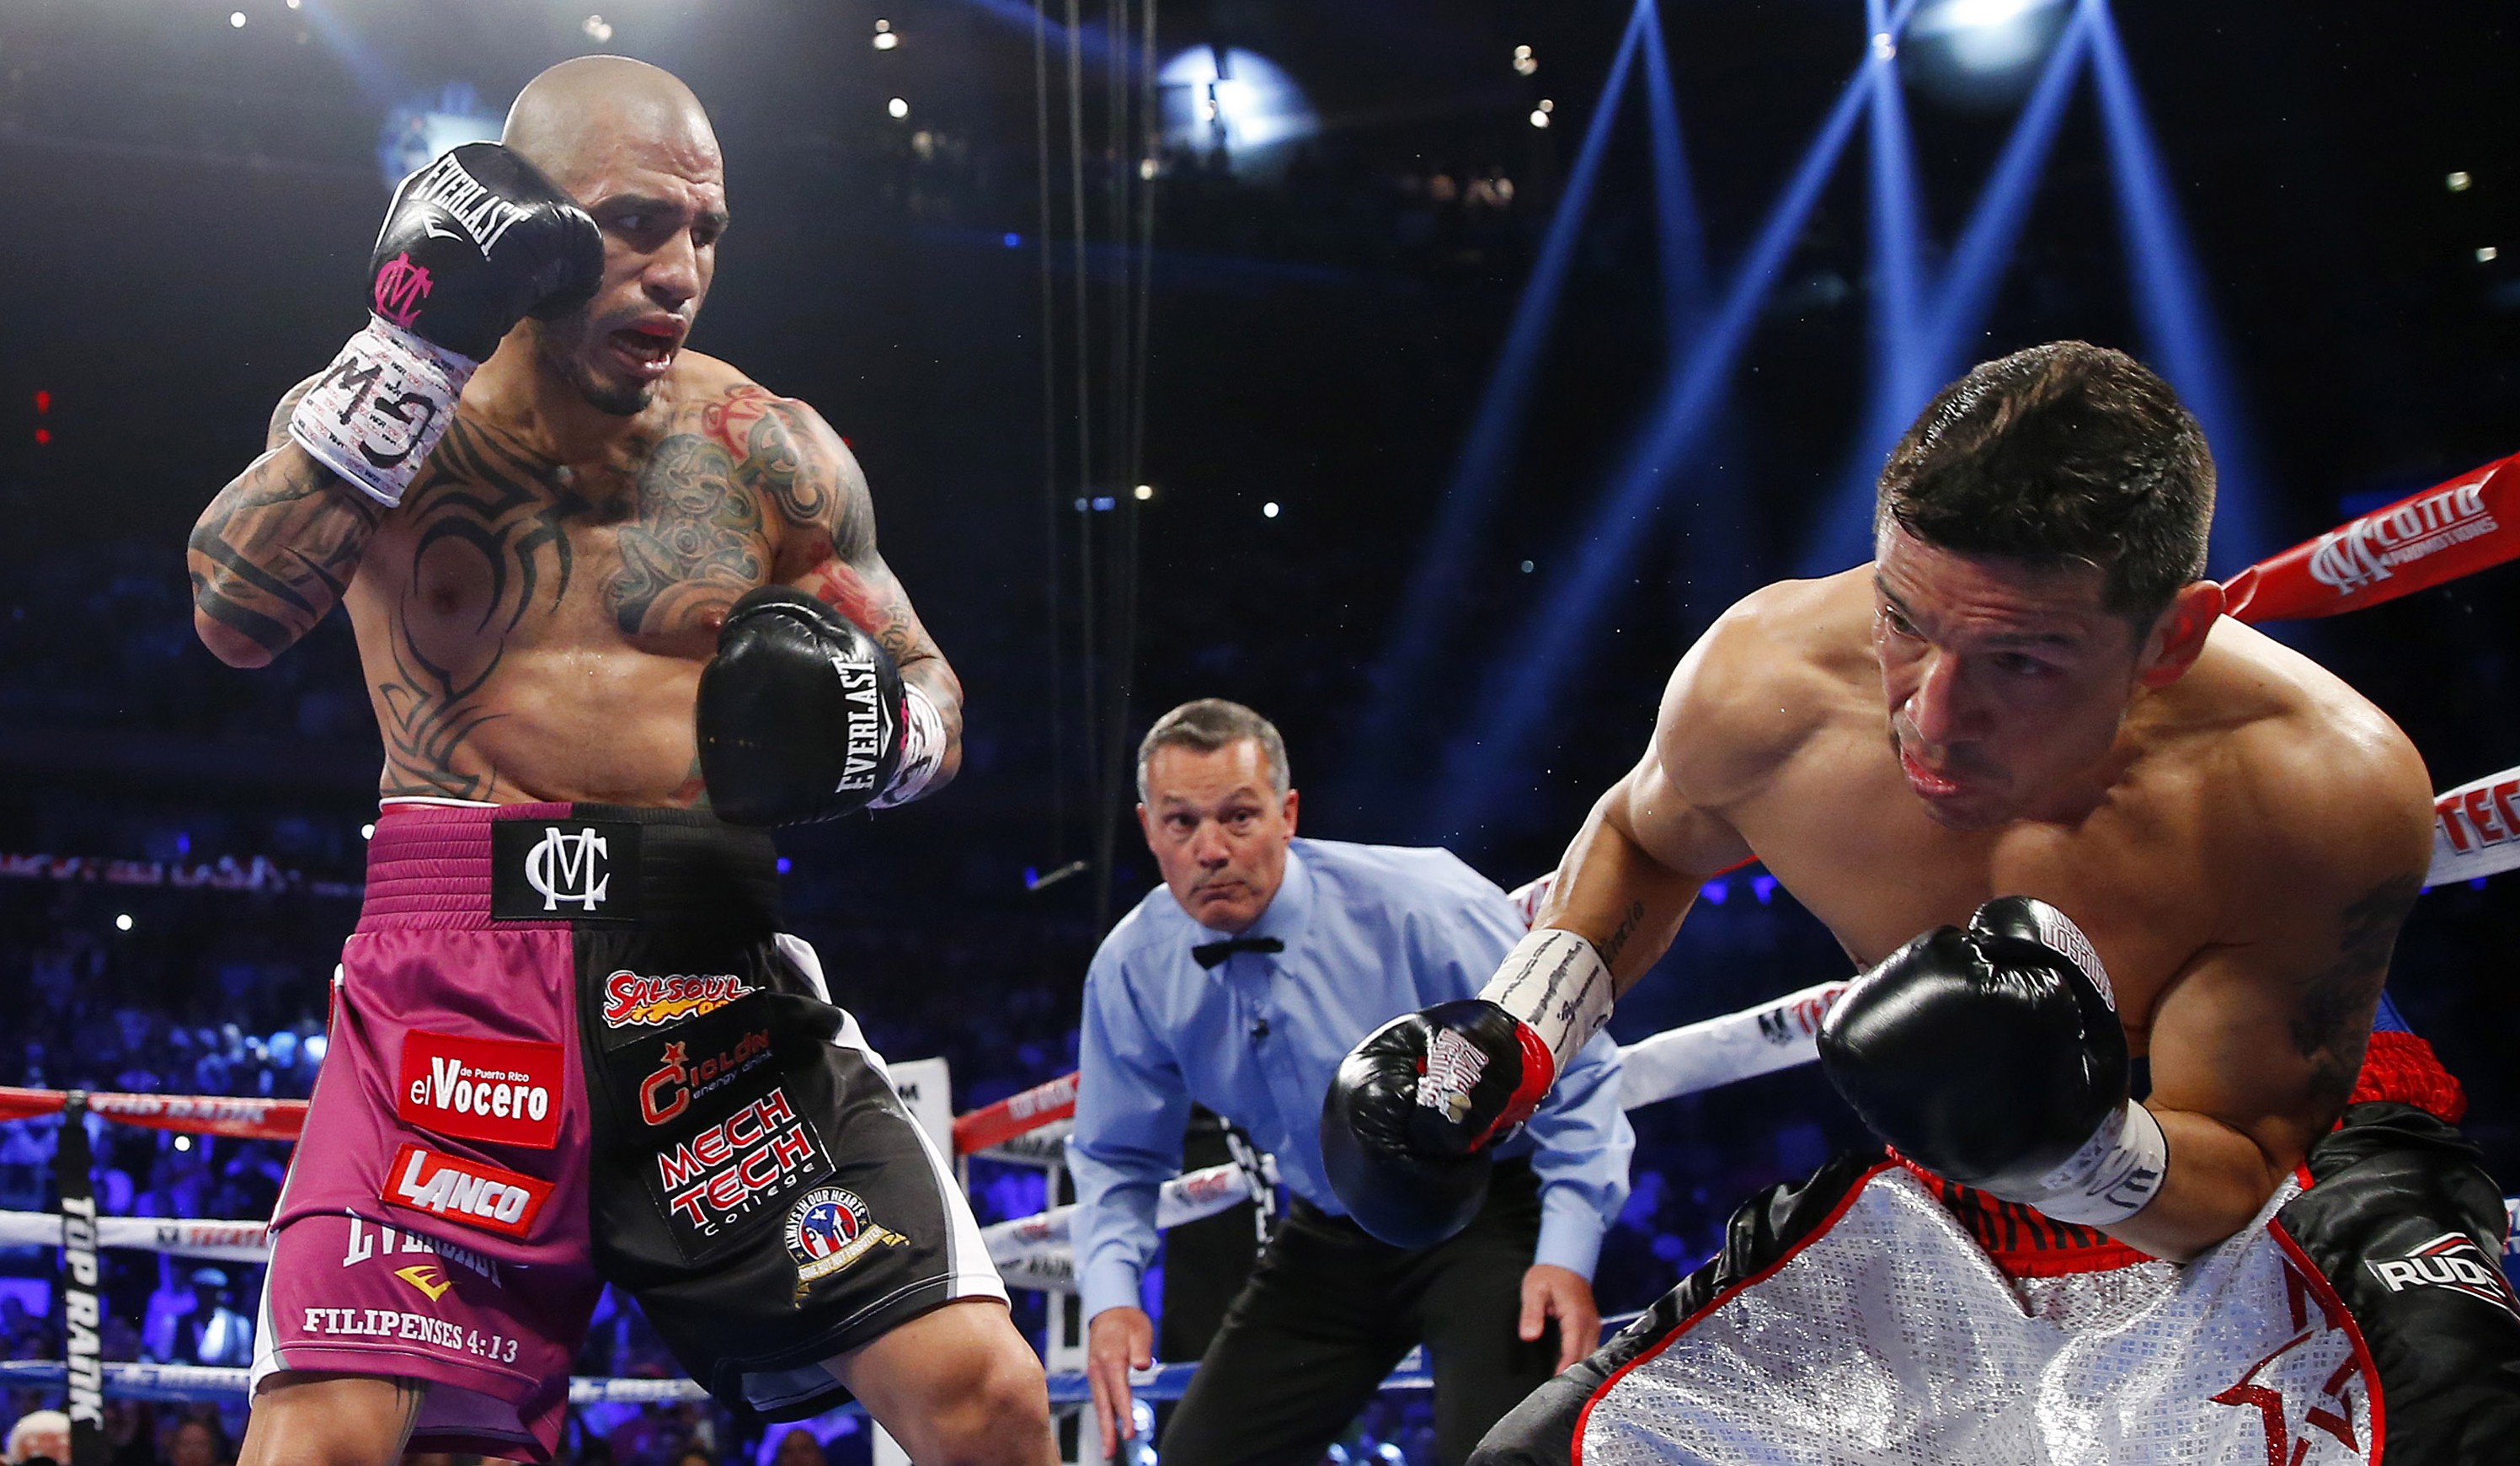 Miguel Cotto Next Fight, Miguel Cotto boxrec, Miguel Cotto record, Miguel Cotto title, Miguel Cotto date, Miguel Cotto location, Miguel Cotto channel